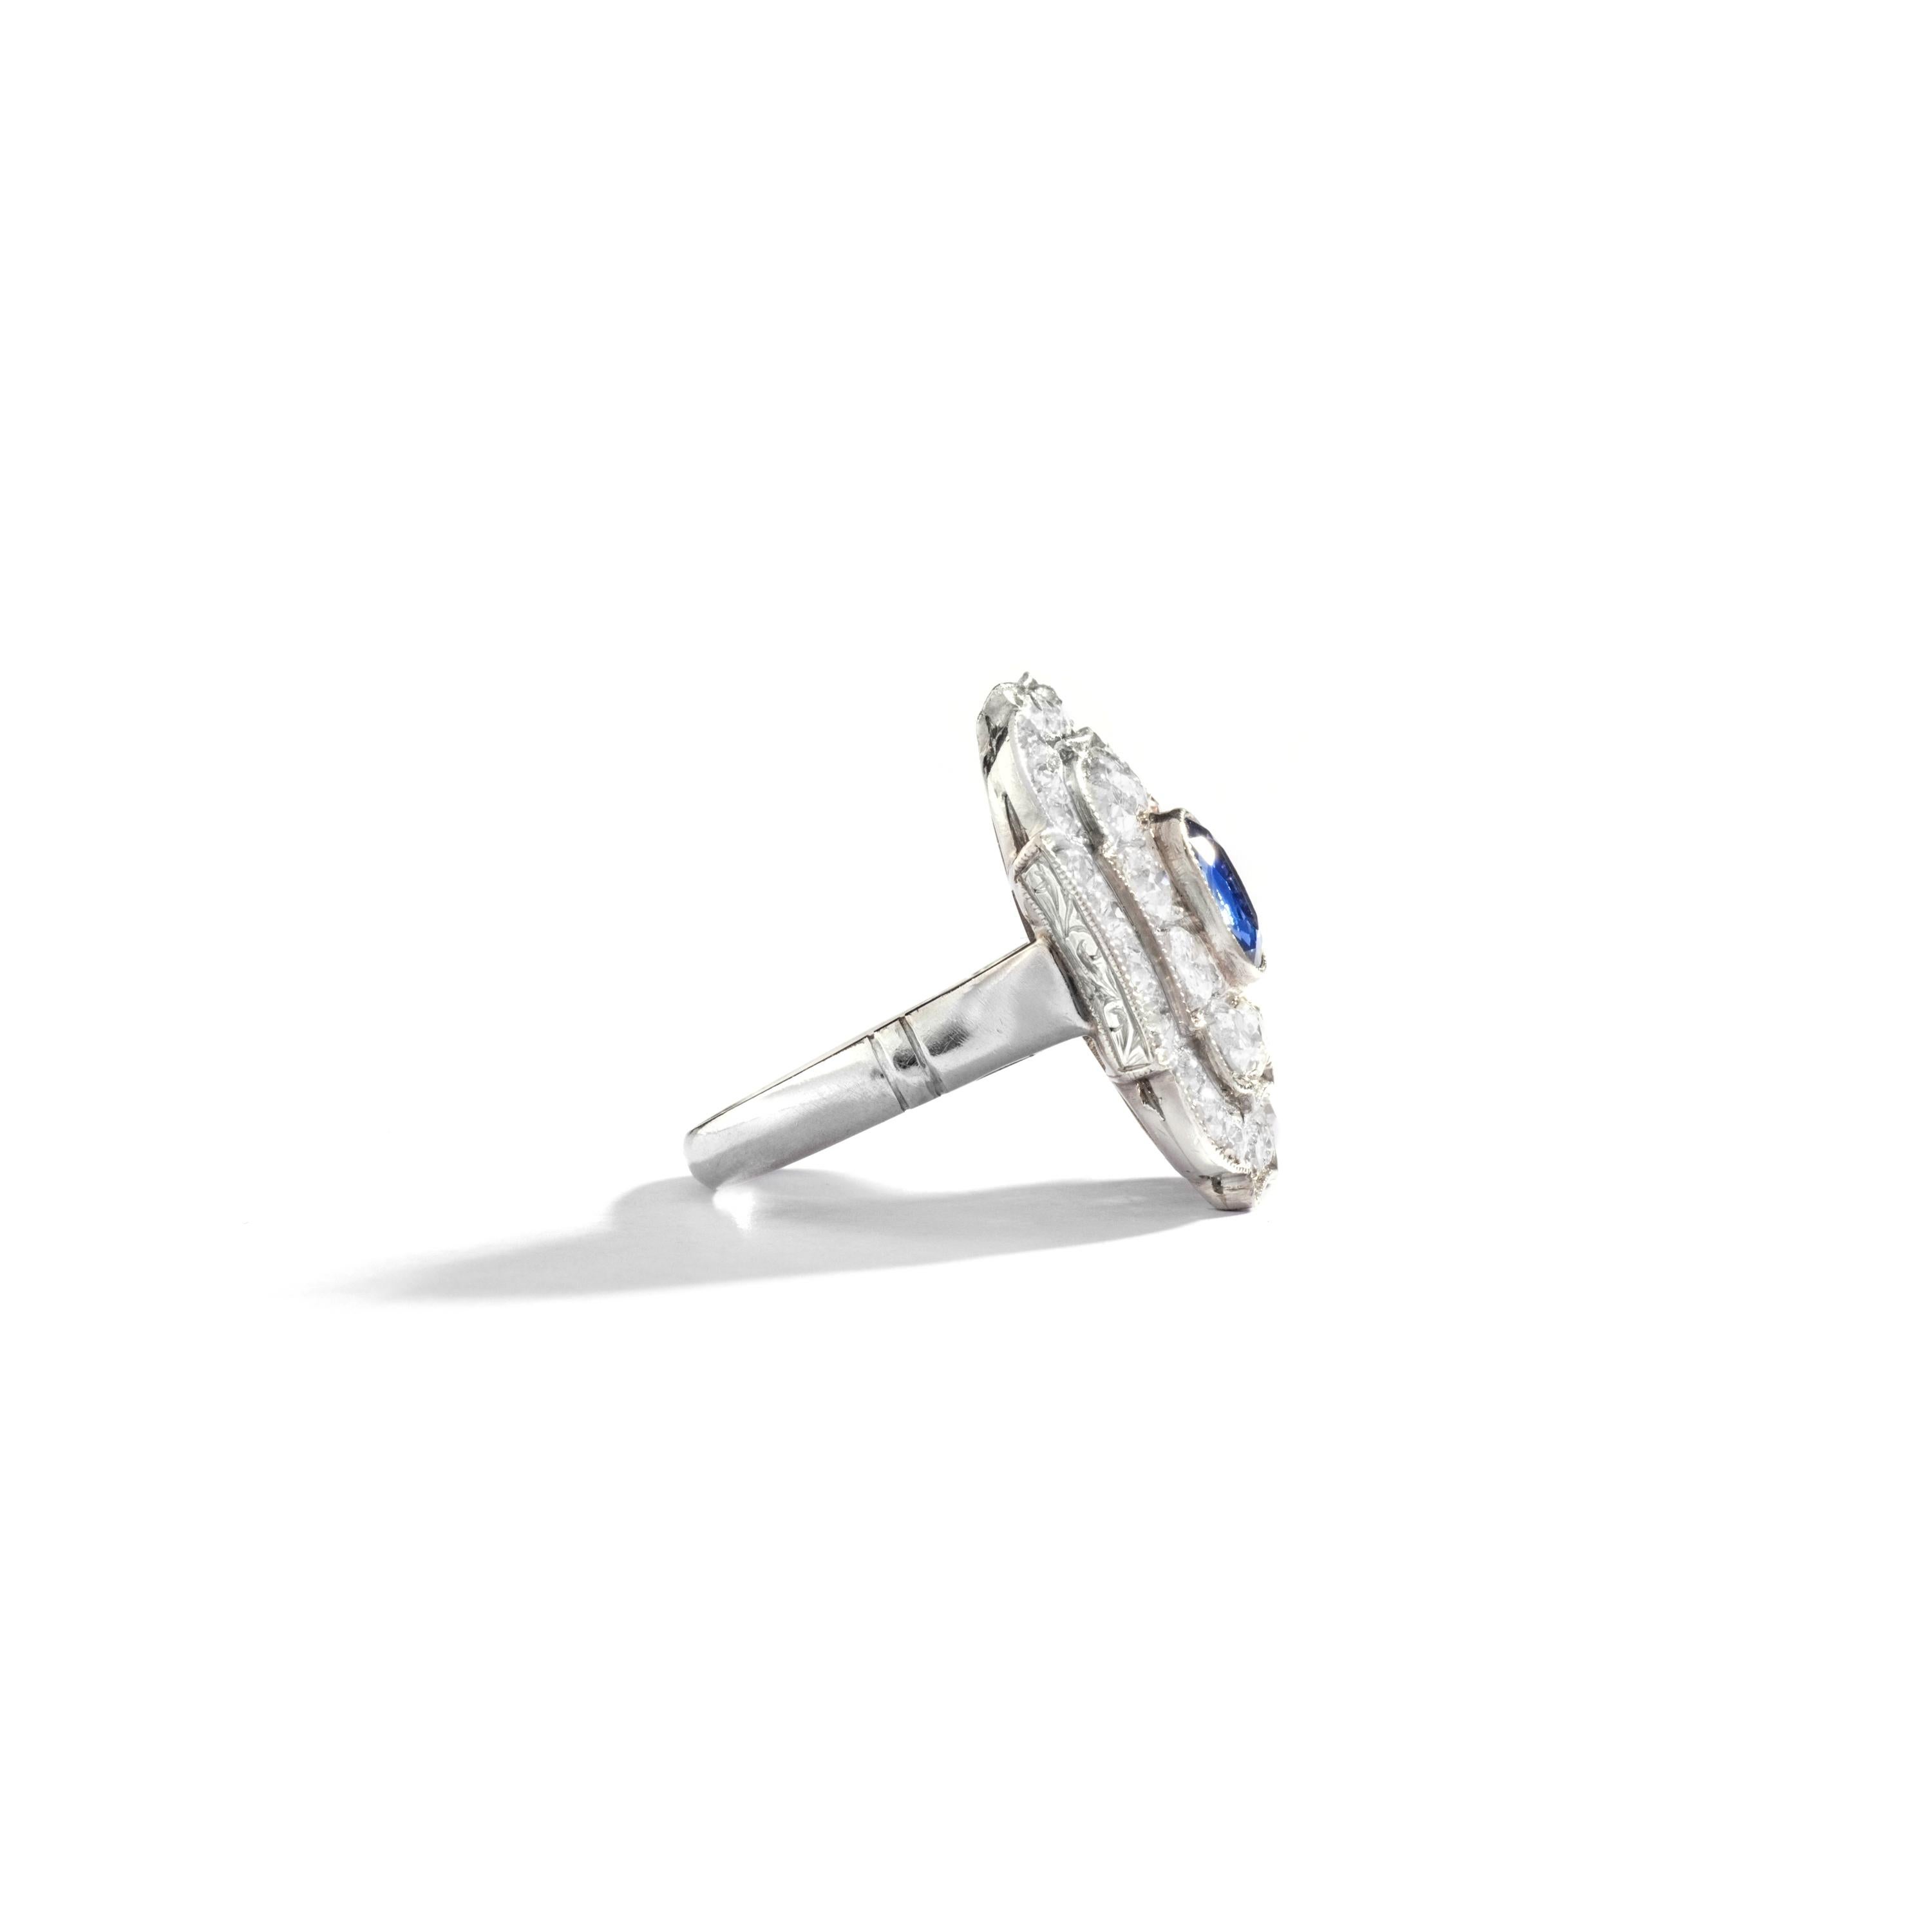 Both significant and easy-to-wear, this sophisticated platinum and diamond ring is centered by a cushion Ceylan Natural Sapphire.

Ring size: 5 1/2 US.
